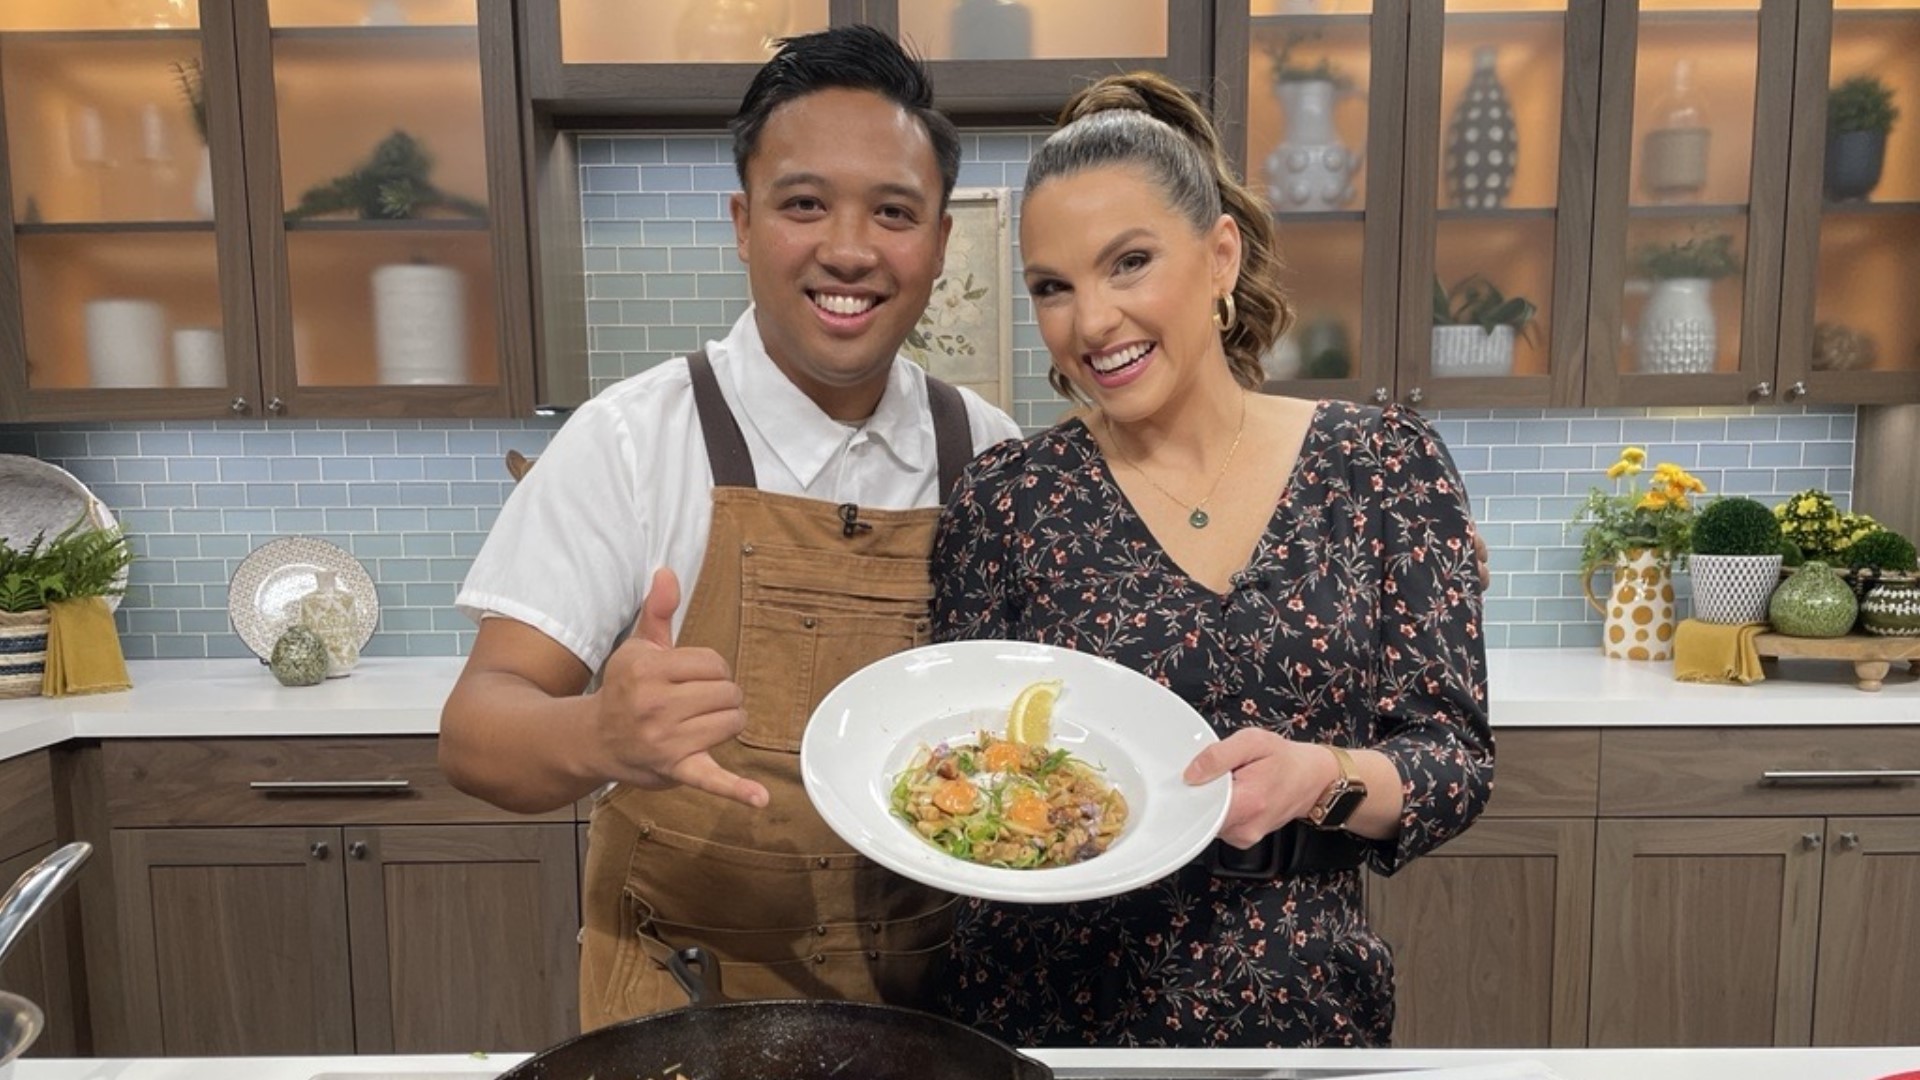 The chef-driven menu is inspired by the mom-and-pop mixed plate joints in Hawaii. Chef Brian Madayag creates magic with his pork sisig dish. #newdaynw